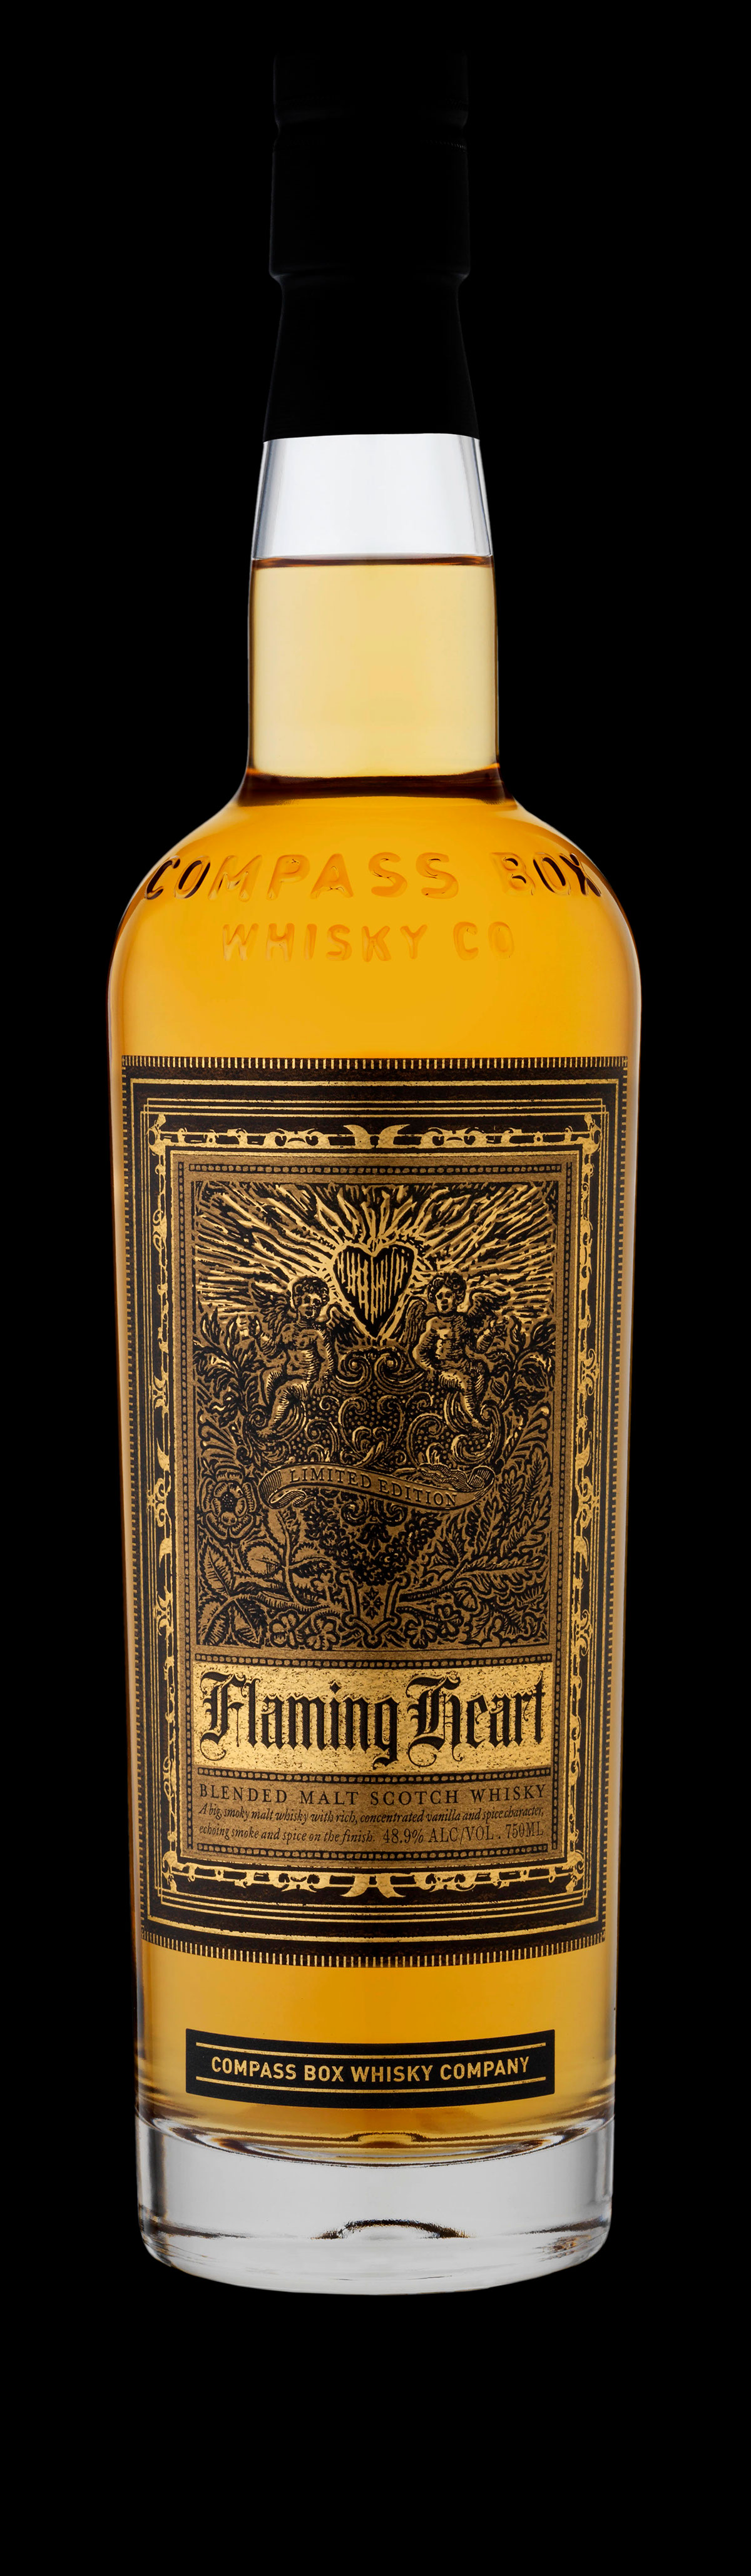 flaming heart Compass Box Stranger & Stranger Flaming heart cupid alcohol bottle scotch malt compass limited edition gold black Whisky